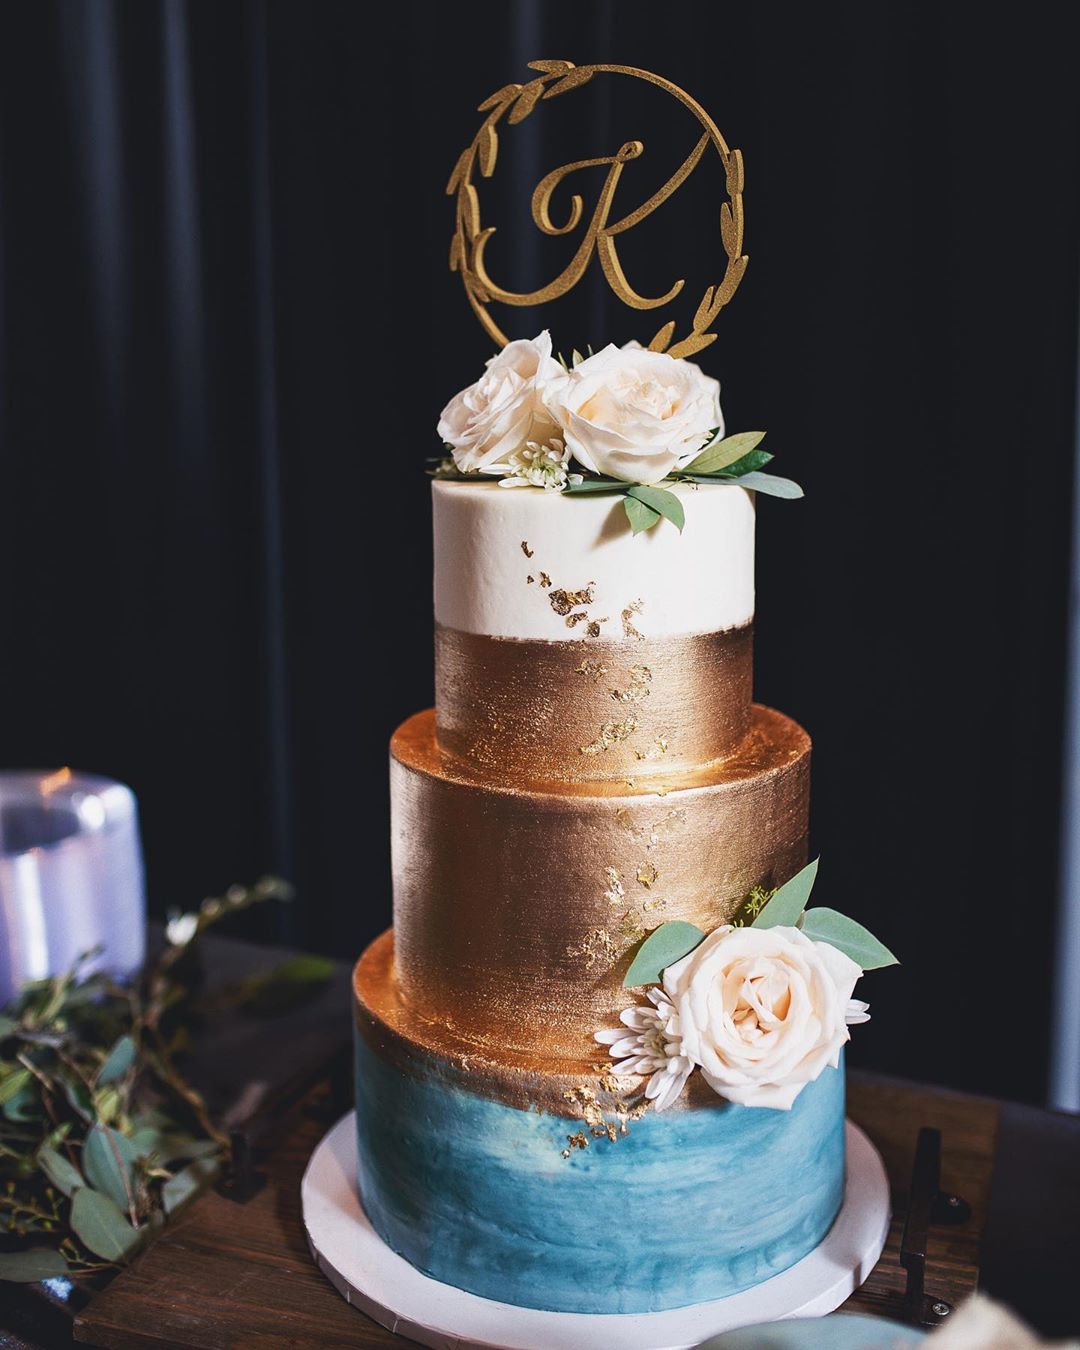 Personalized Wedding Cake Designs You Can Book For Your Wedding